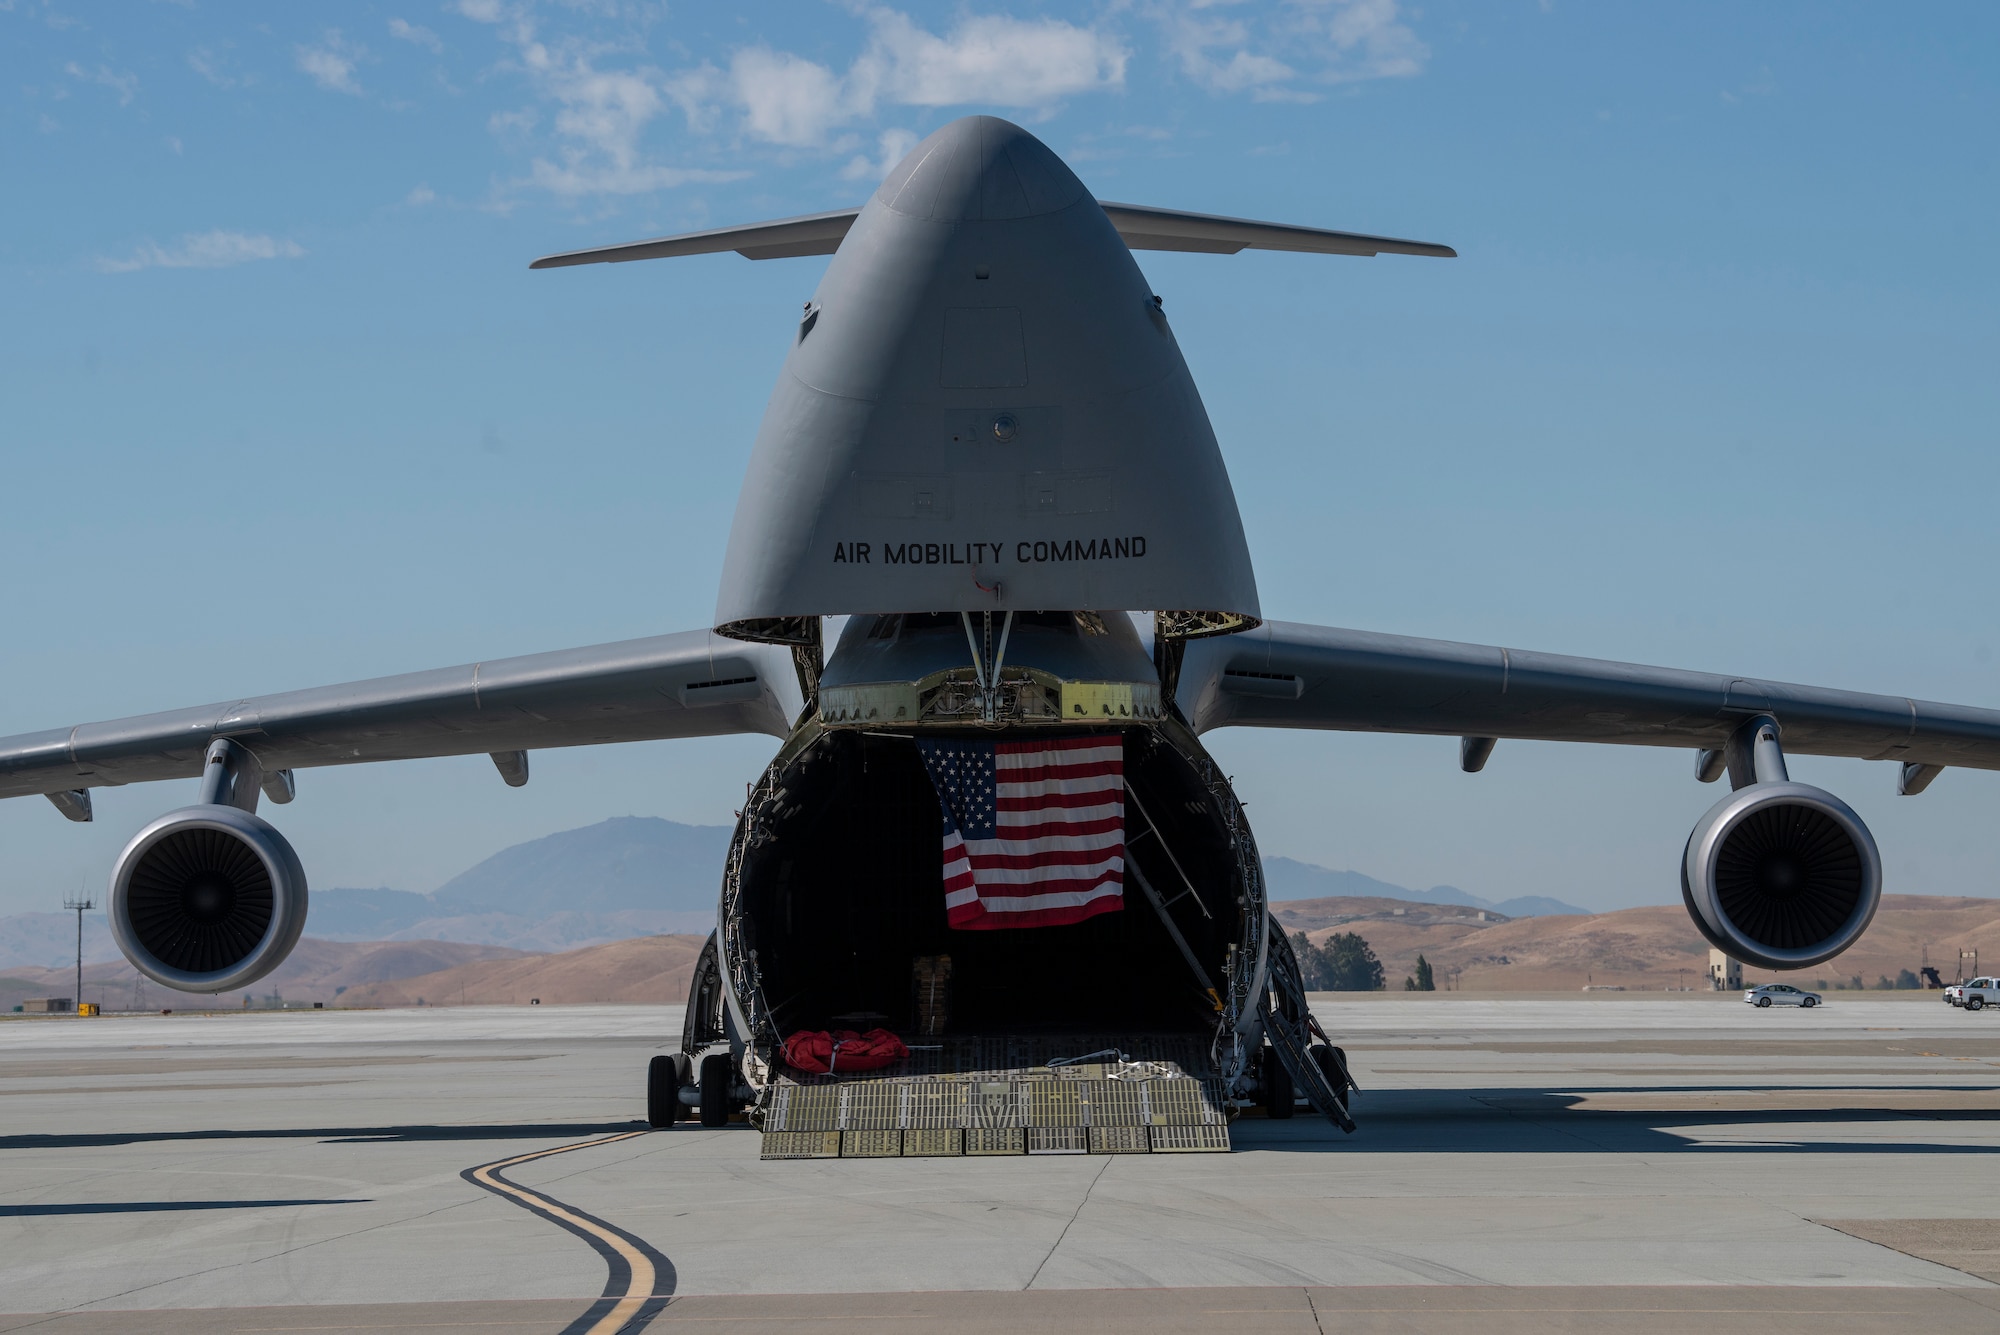 A C-5M Super Galaxy featuring the American flag is part of a static display for the 60th Operations Group change of command ceremony July 26, 2019, at Travis Air Force Base, California. The C-5M was joined in the display by a KC-10 Extender and C-17 Globemaster III. During the ceremony, U.S. Air Force Col. Theresa Weems, outgoing 60th OG commander, transferred command to Col. Gregg Johnson. (U.S. Air Force photo by Tech. Sgt. James Hodgman)